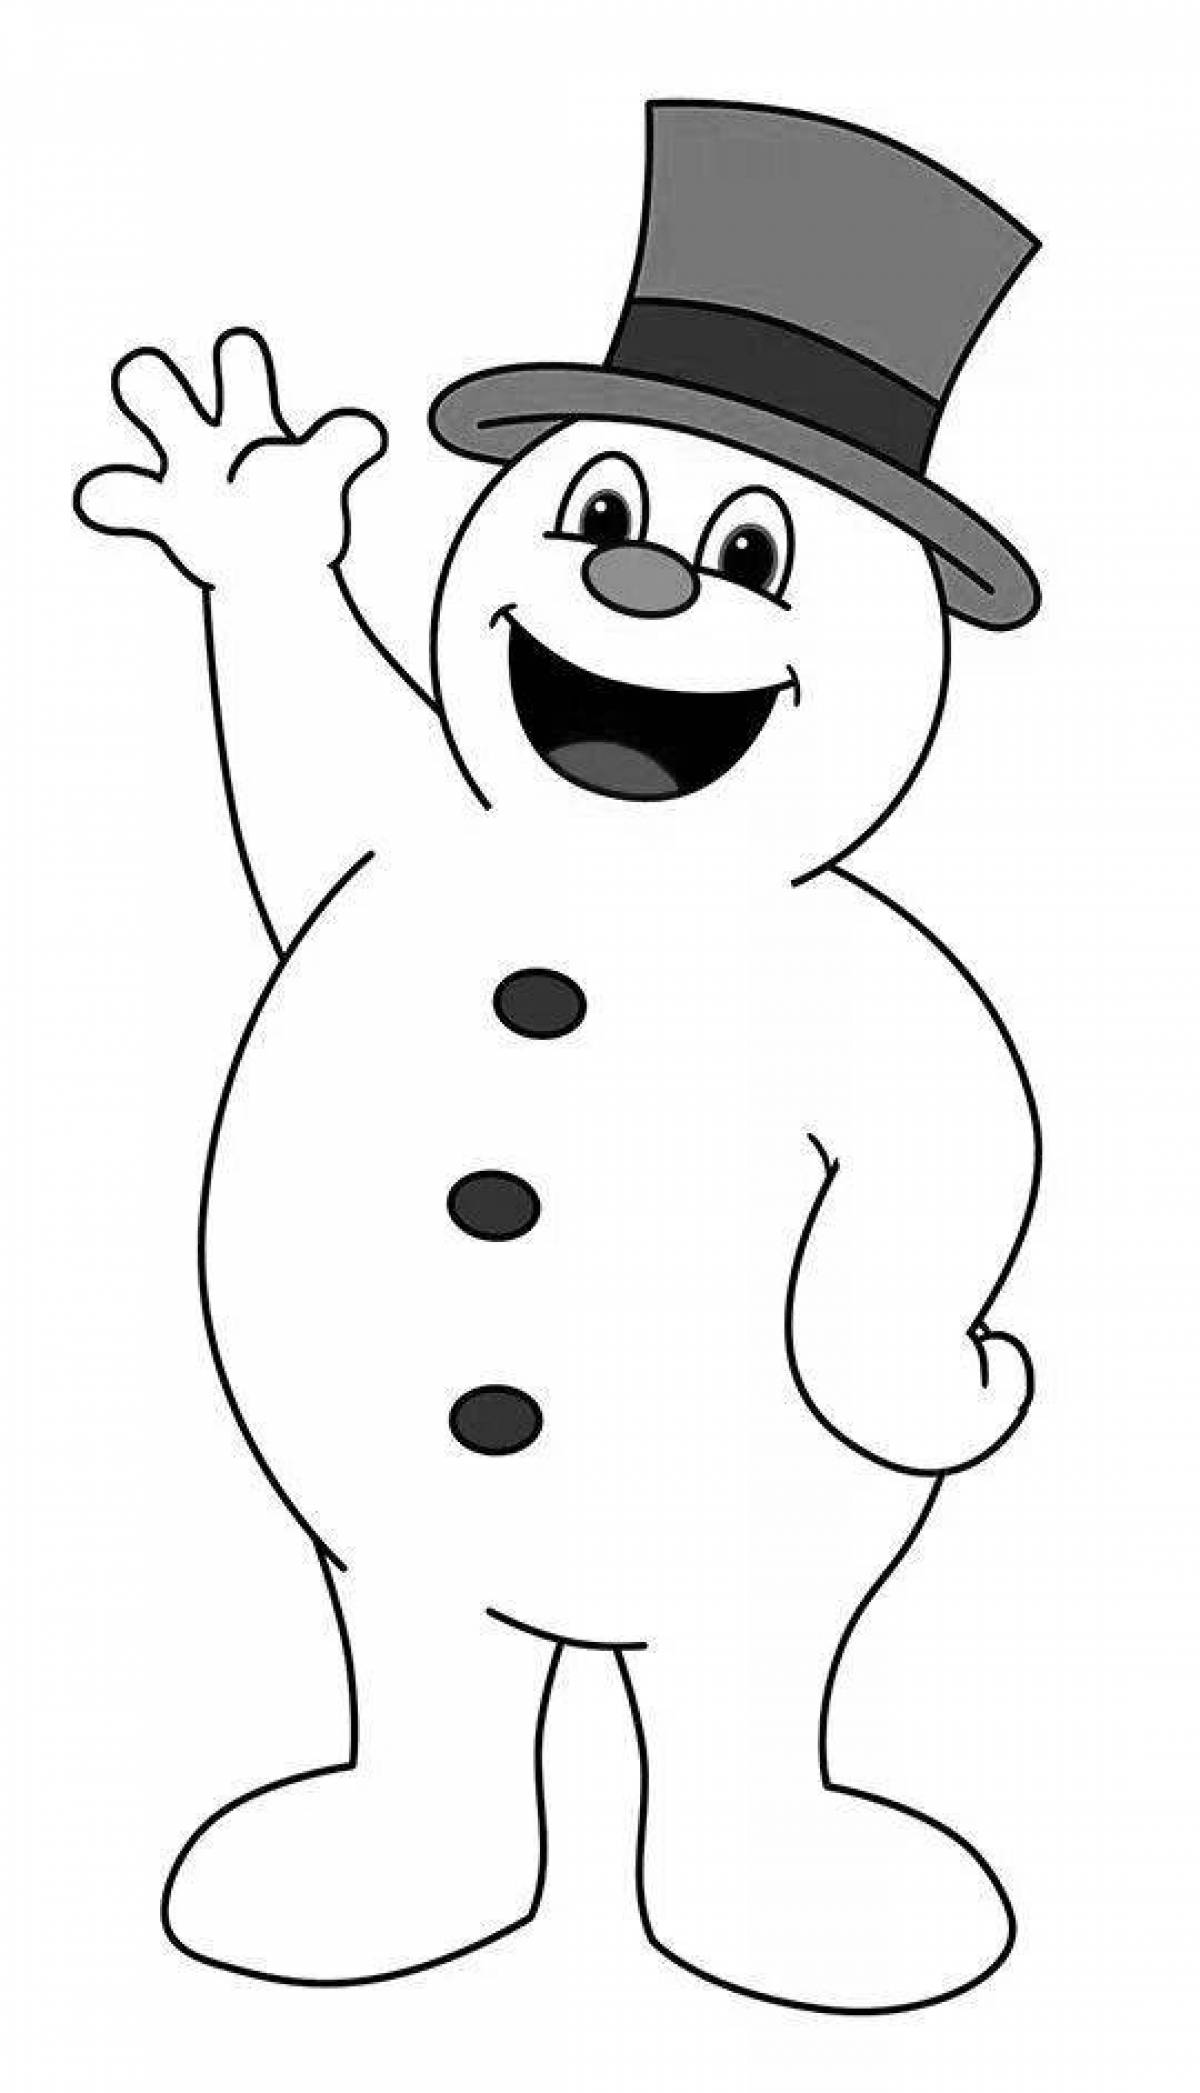 Colorful snowman coloring book in color